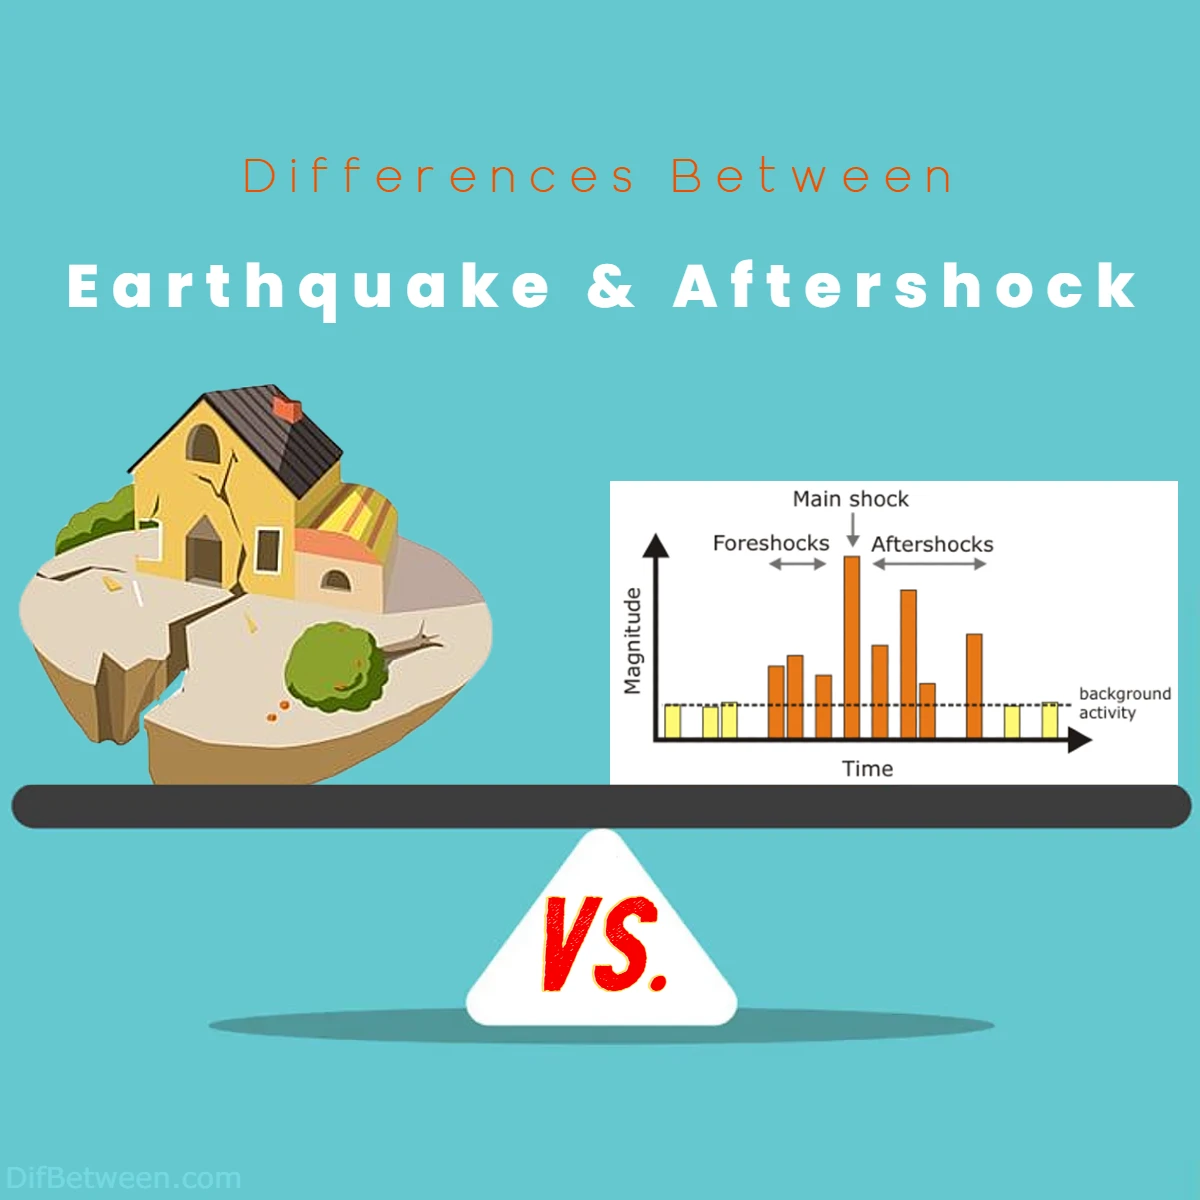 Differences Between Earthquake vs Aftershock